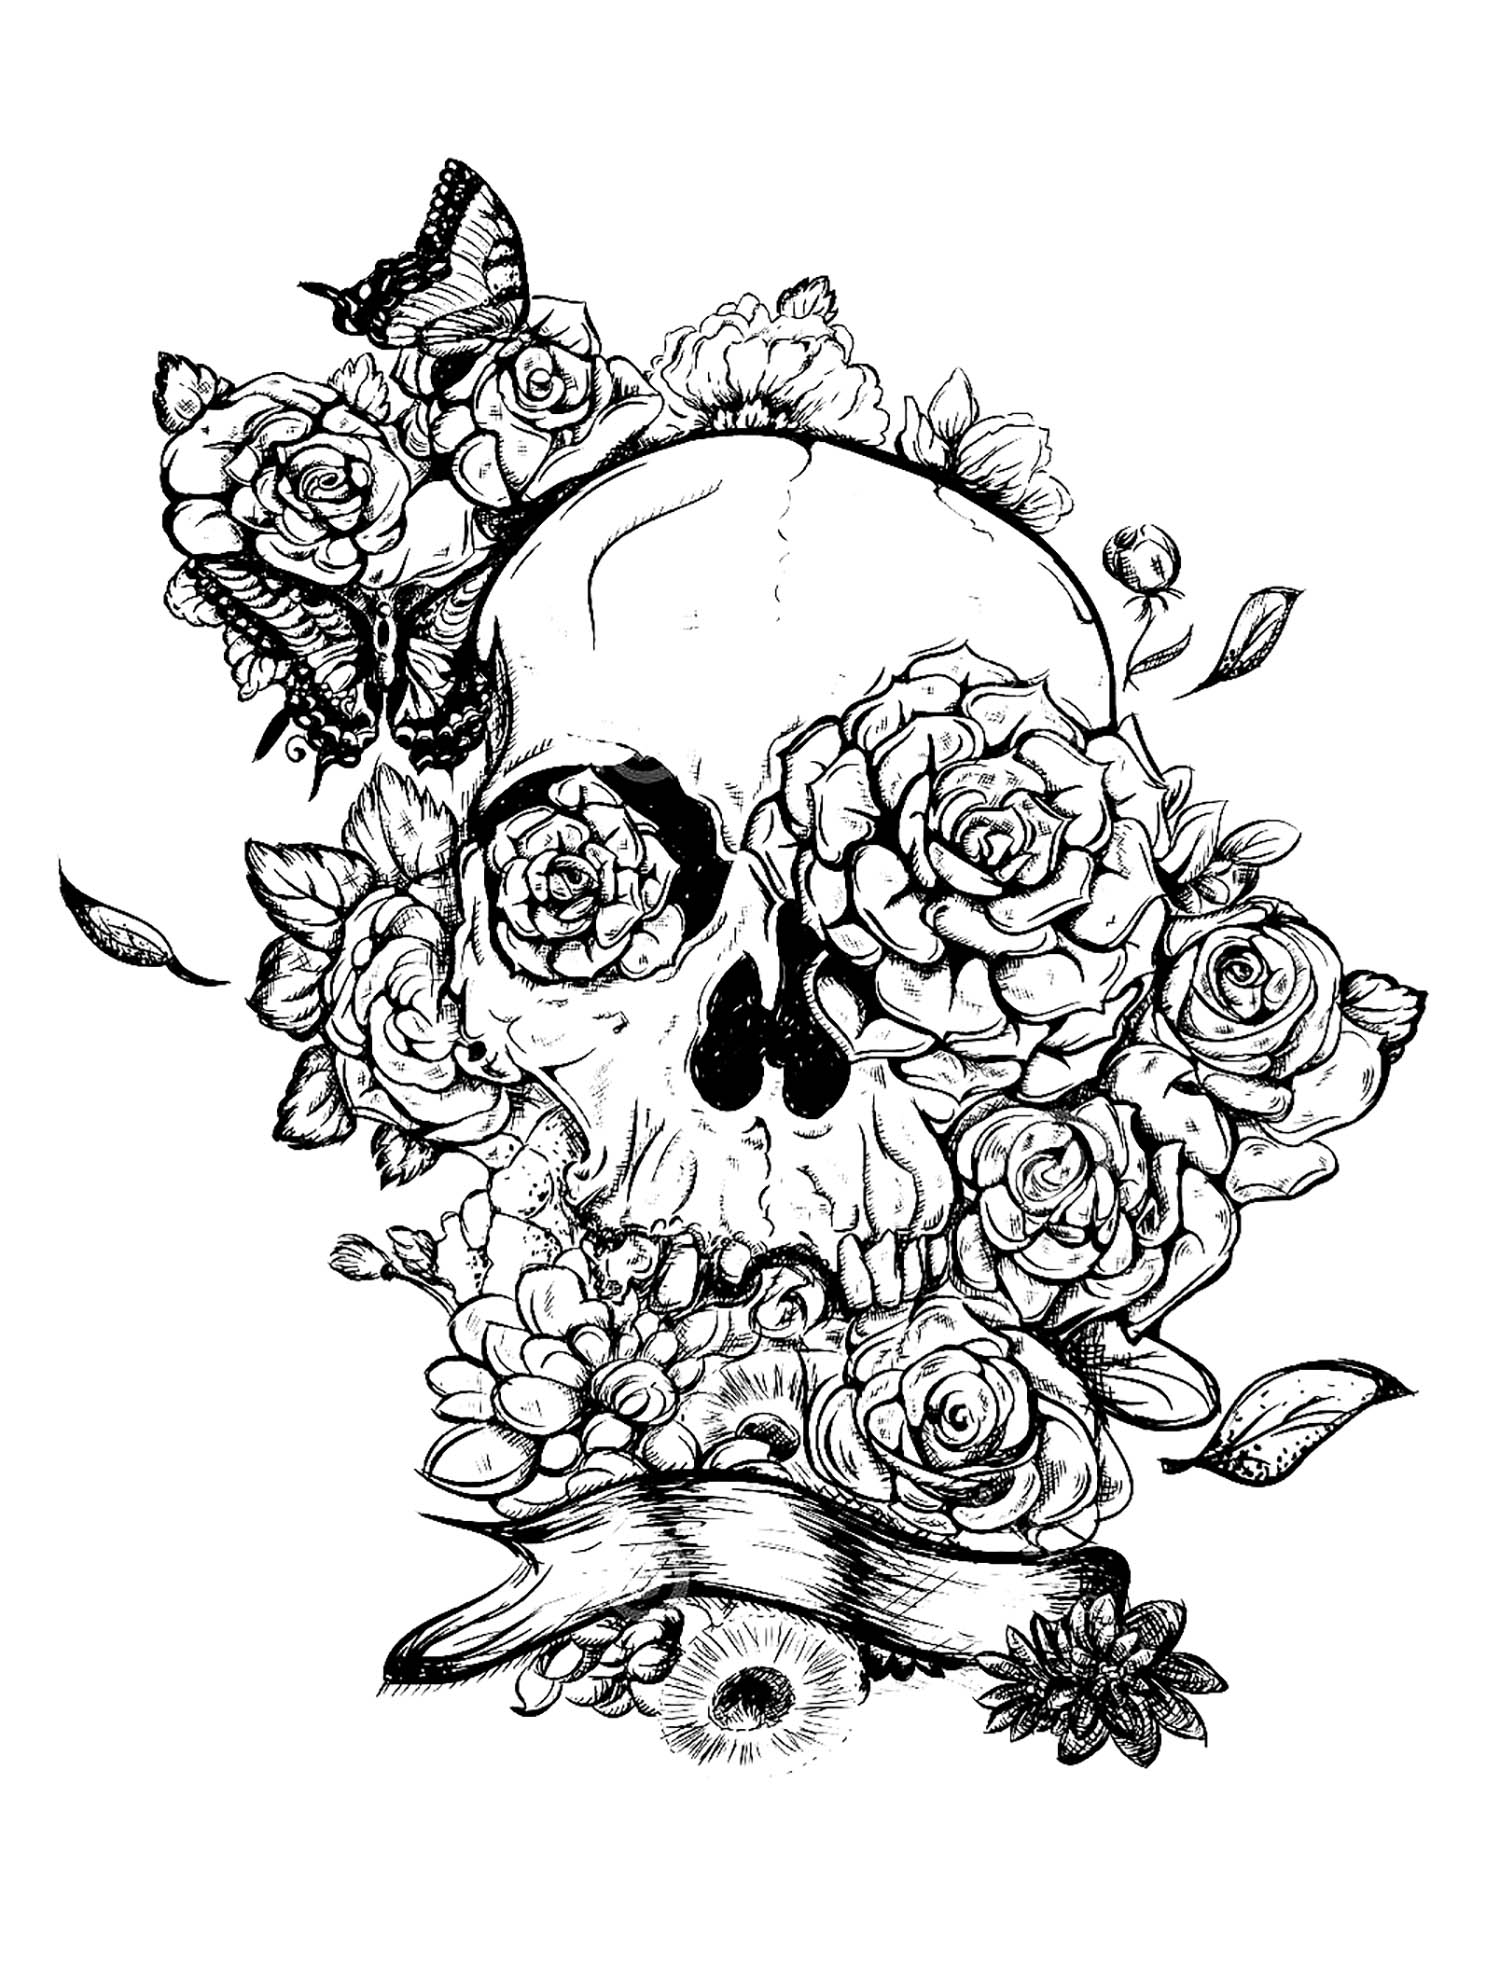 Download Skull and roses tattoo - Tattoos Adult Coloring Pages